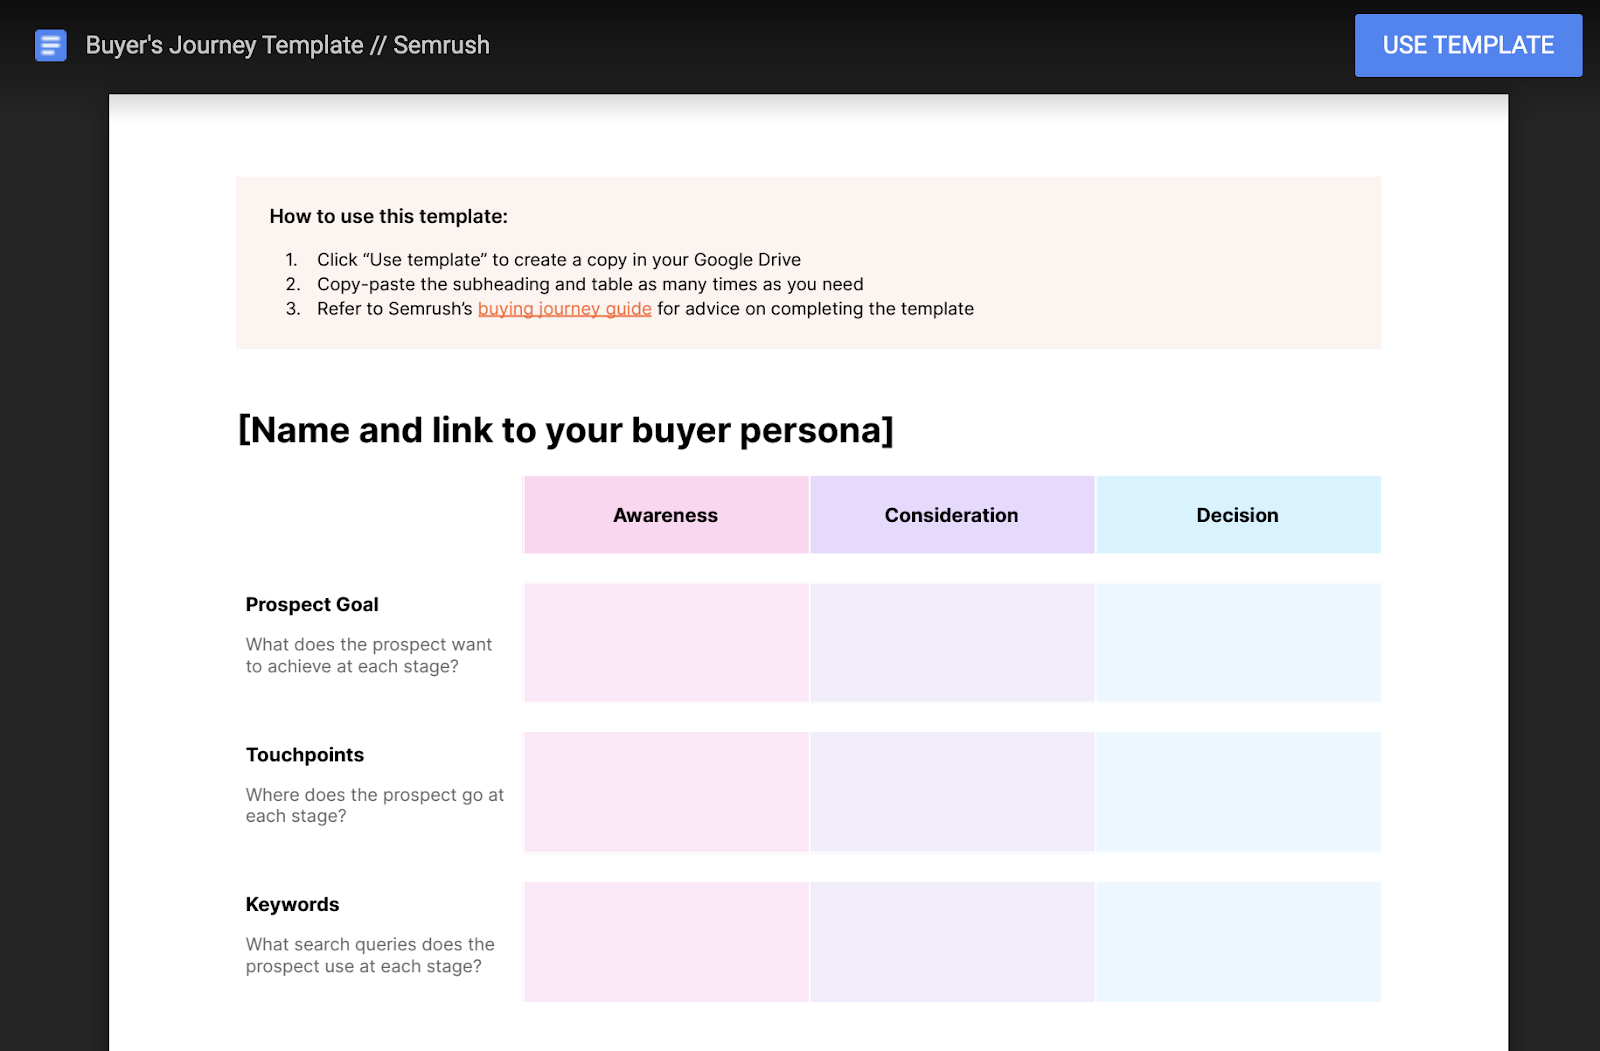 Buyer's journey template in google docs with Use Template button in the top right corner